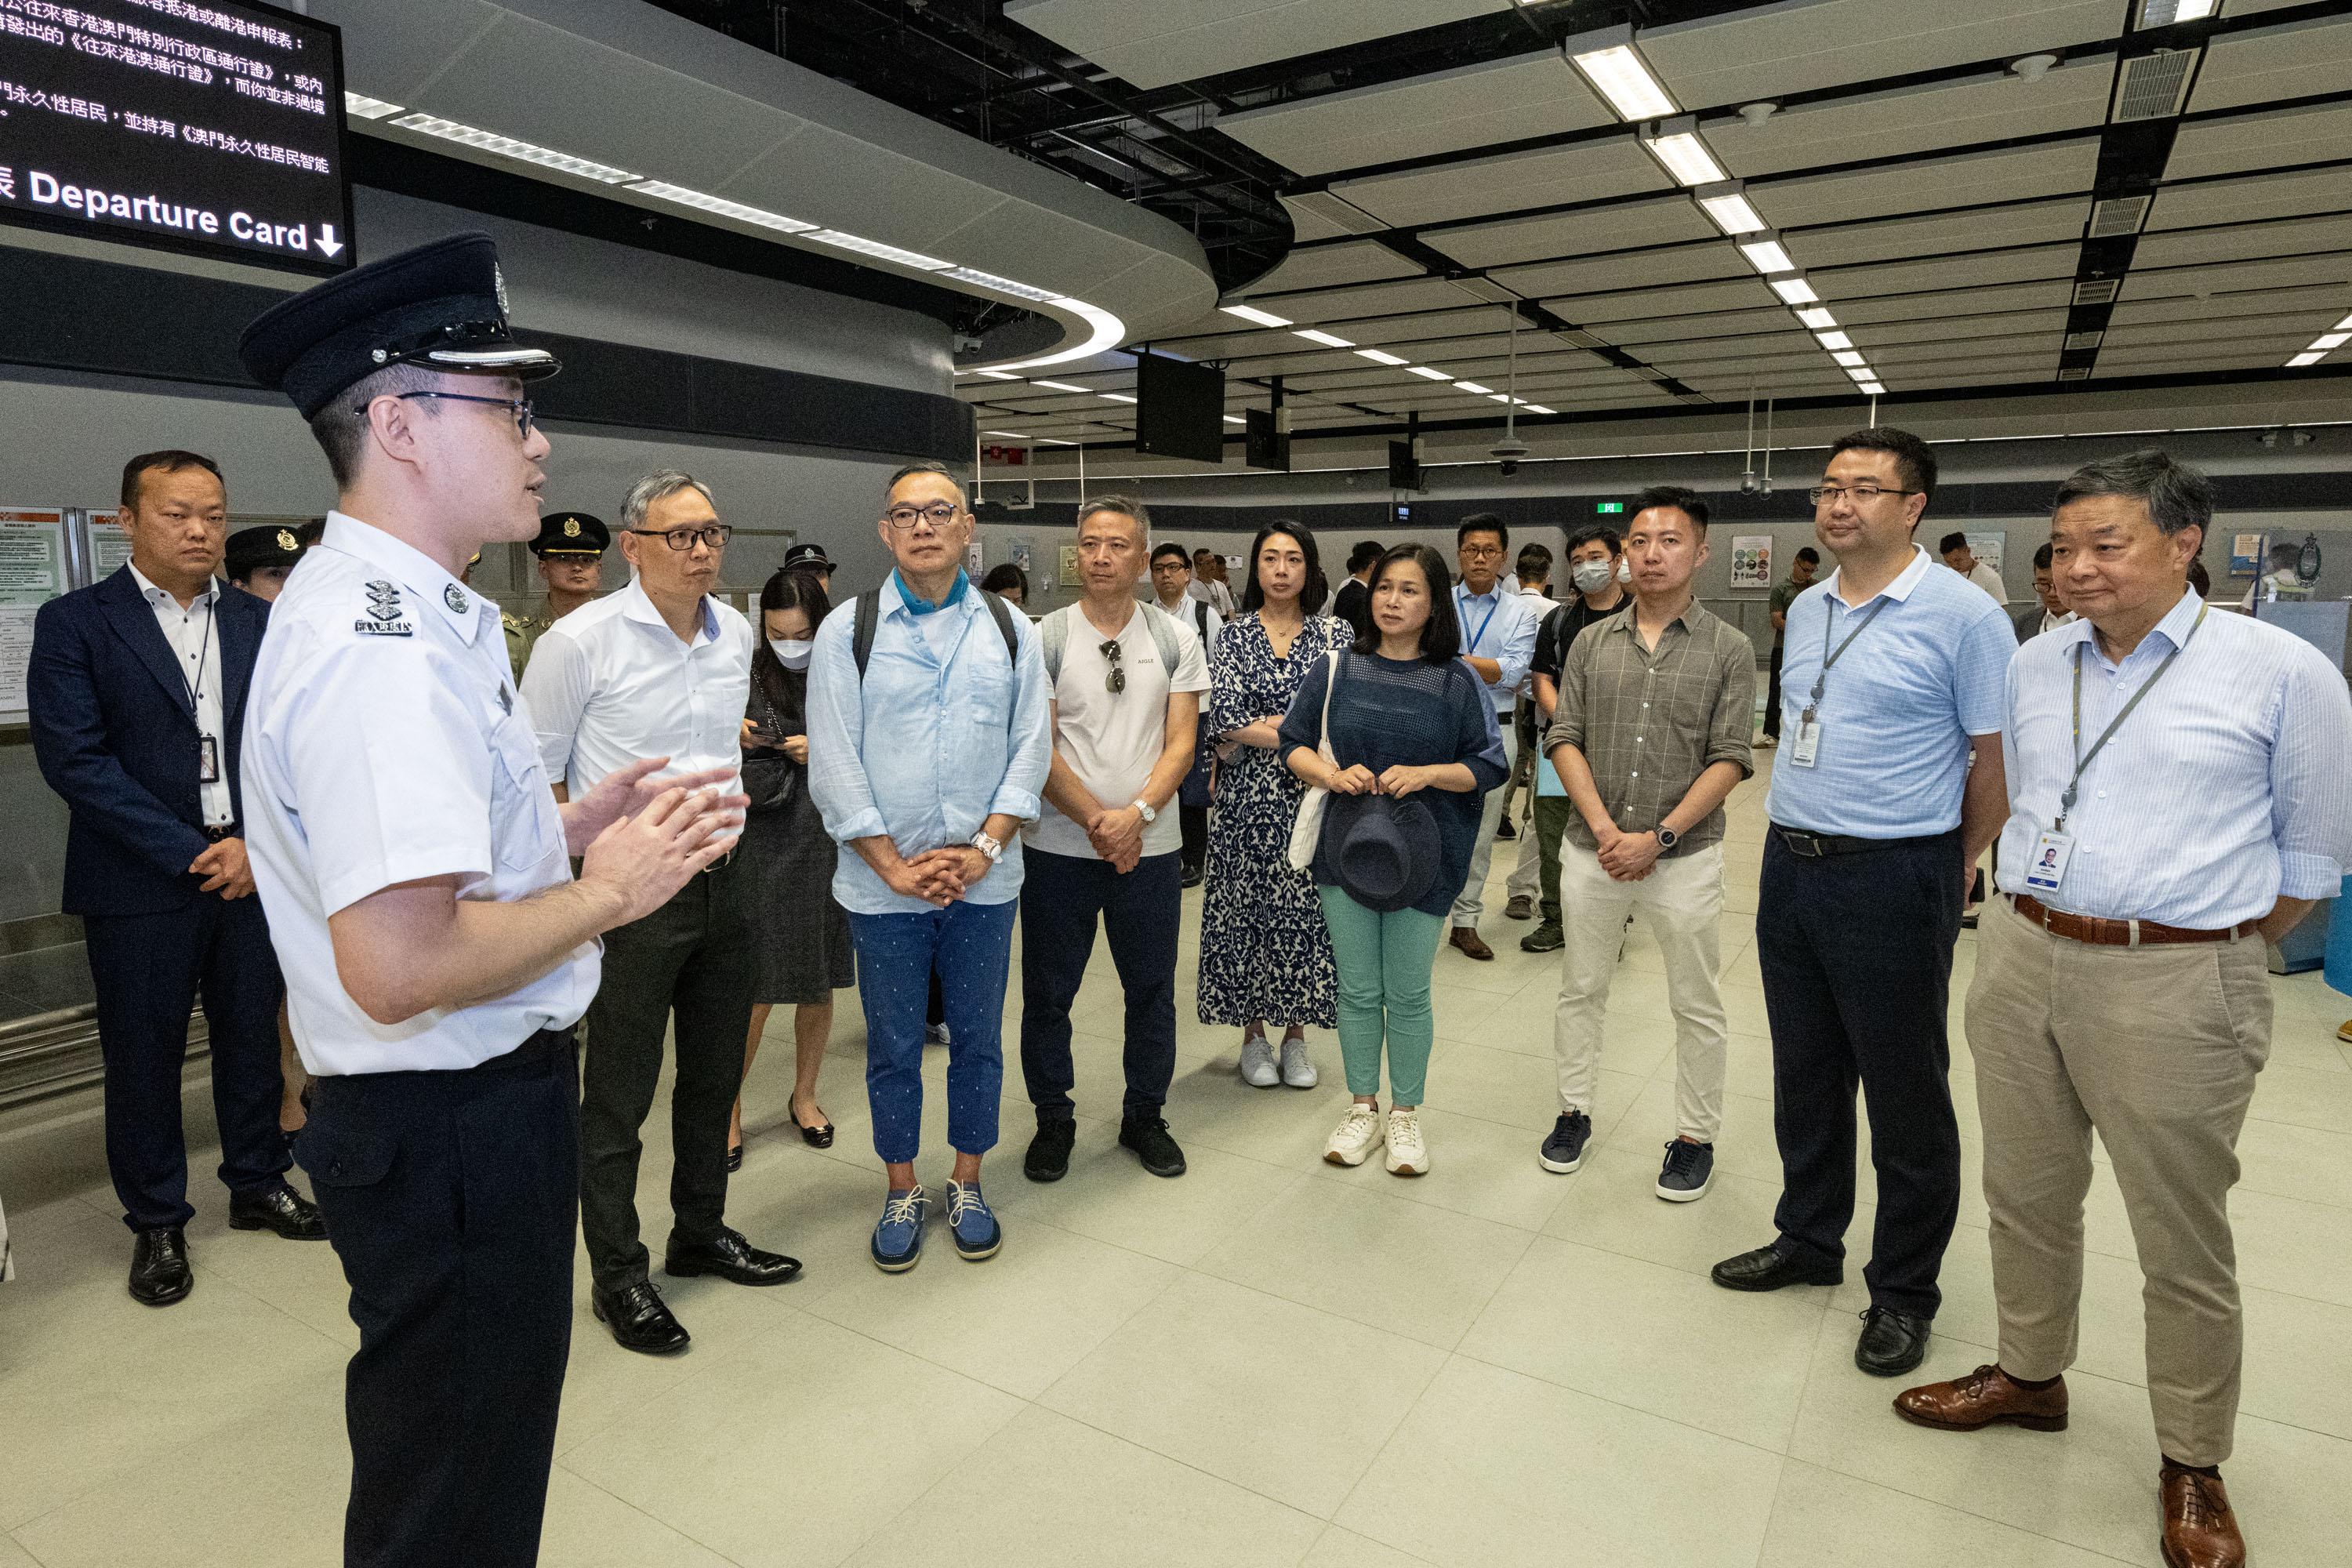 The Legislative Council (LegCo) Panel on Security visits Sha Tau Kok and Liantang/Heung Yuen Wai Boundary Control Point today (July 11). Photo shows LegCo Members observing the immigration and customs clearance procedures for travellers at the Liantang/Heung Yuen Wai Boundary Control Point.